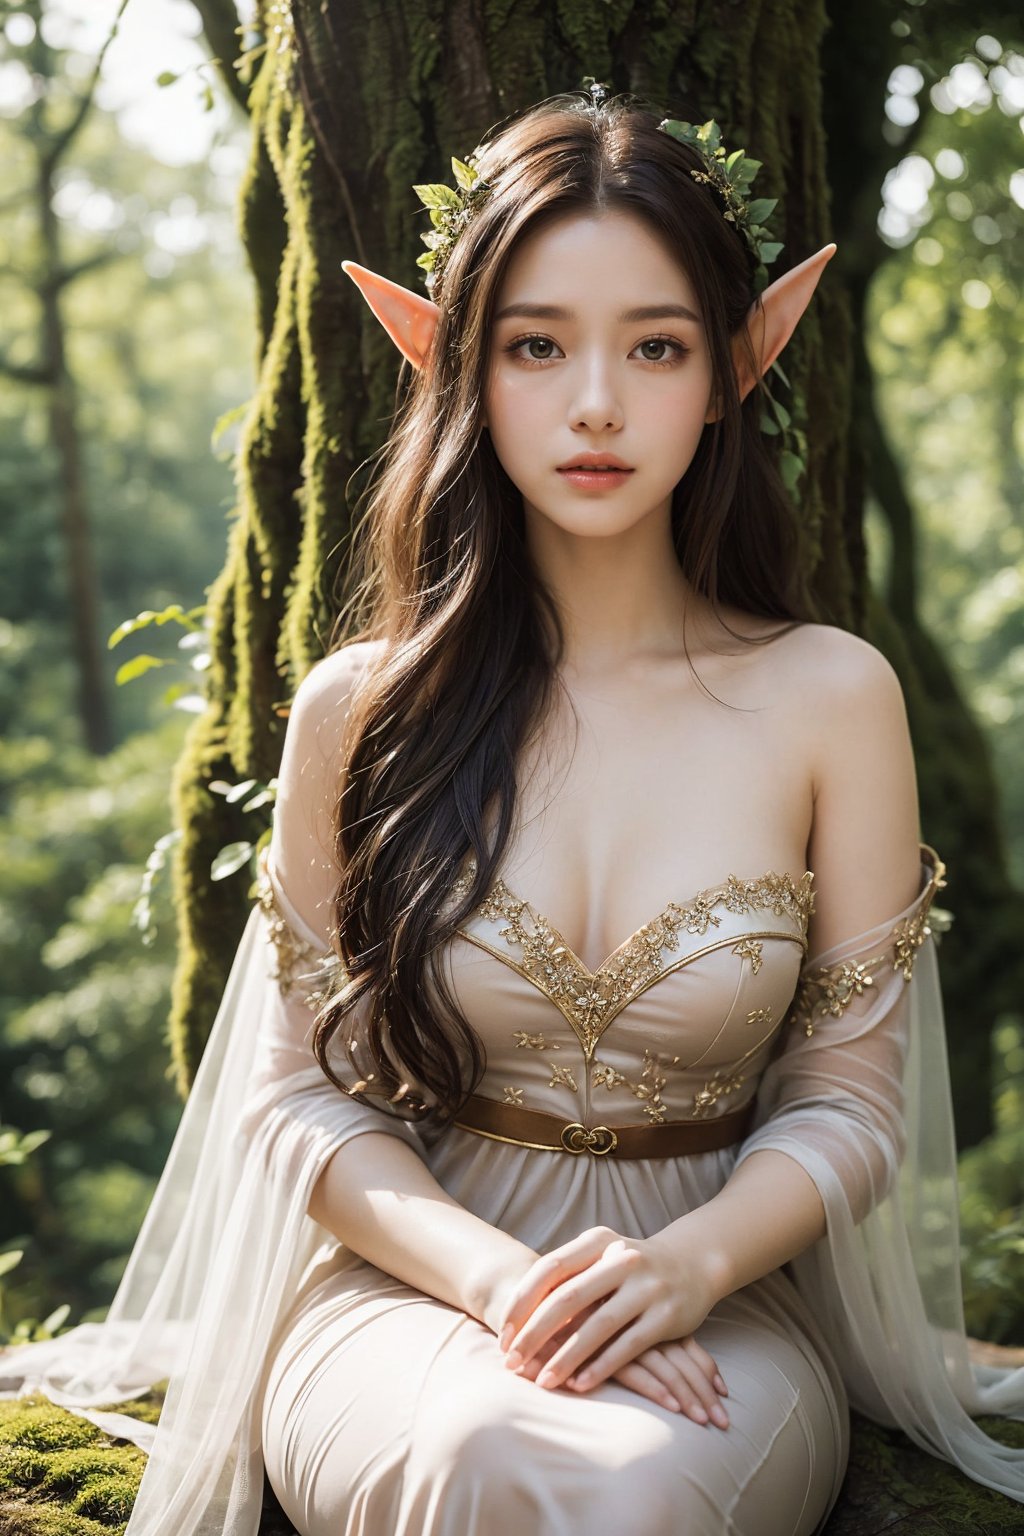 era elf, (queen elves sit on the treetops:1.2), enchanting beauty, (fantasy), (elf mother tree), (world tree), ethereal glow, pointed ears, delicate facial features, long elegant hair, mystical ambiance, soft lighting, harmonious with nature, subtle magical elements, serene, dreamlike quality, pastel colors, (castle)